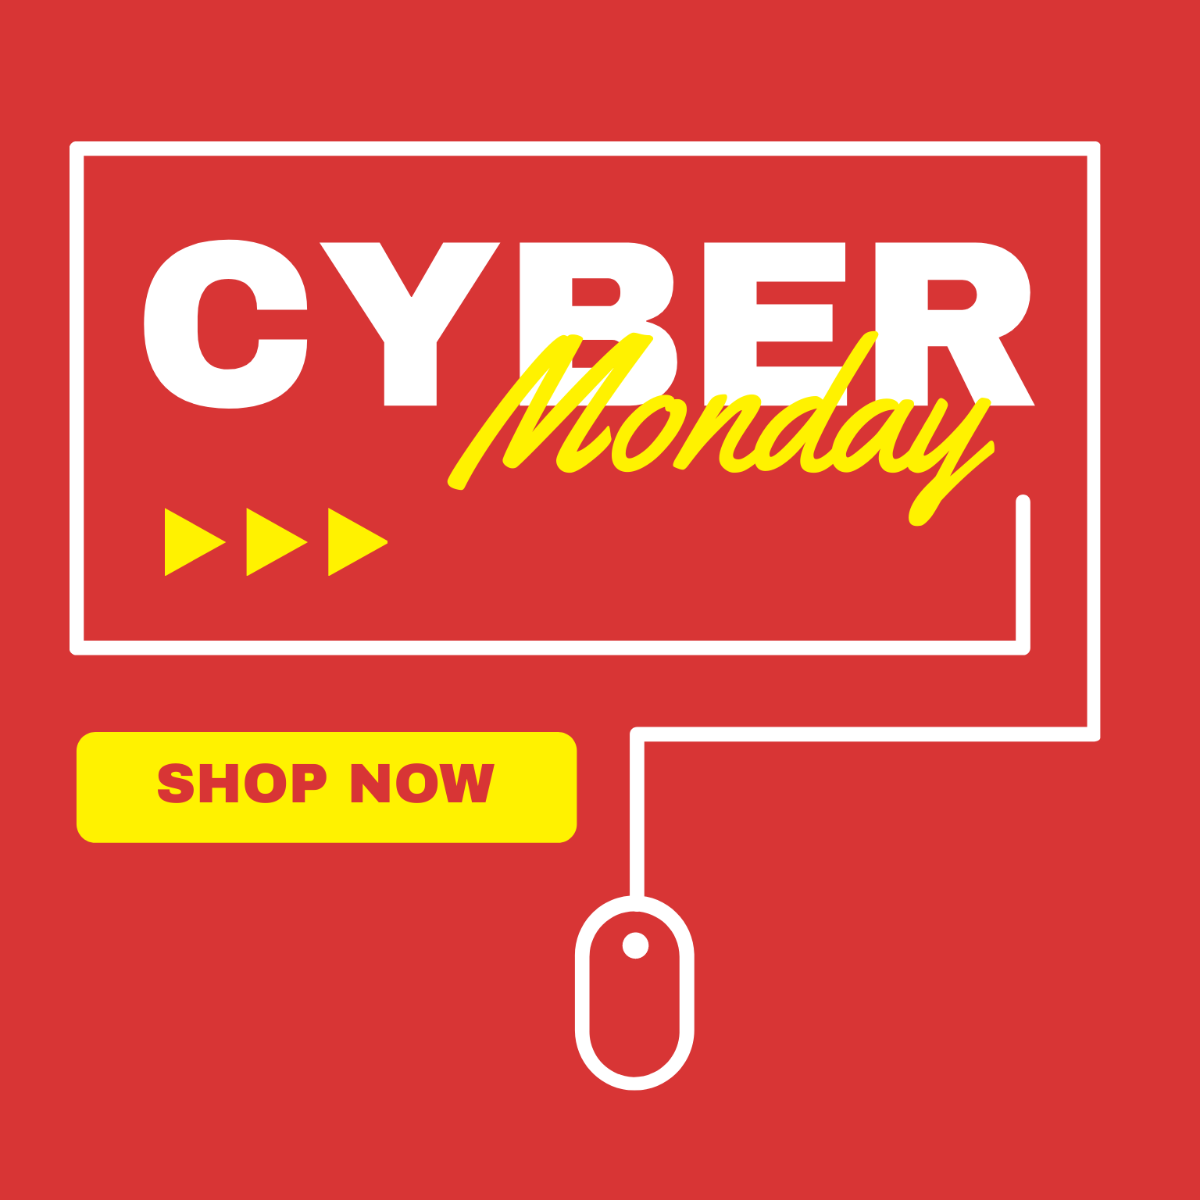 Cyber Monday Sign Vector